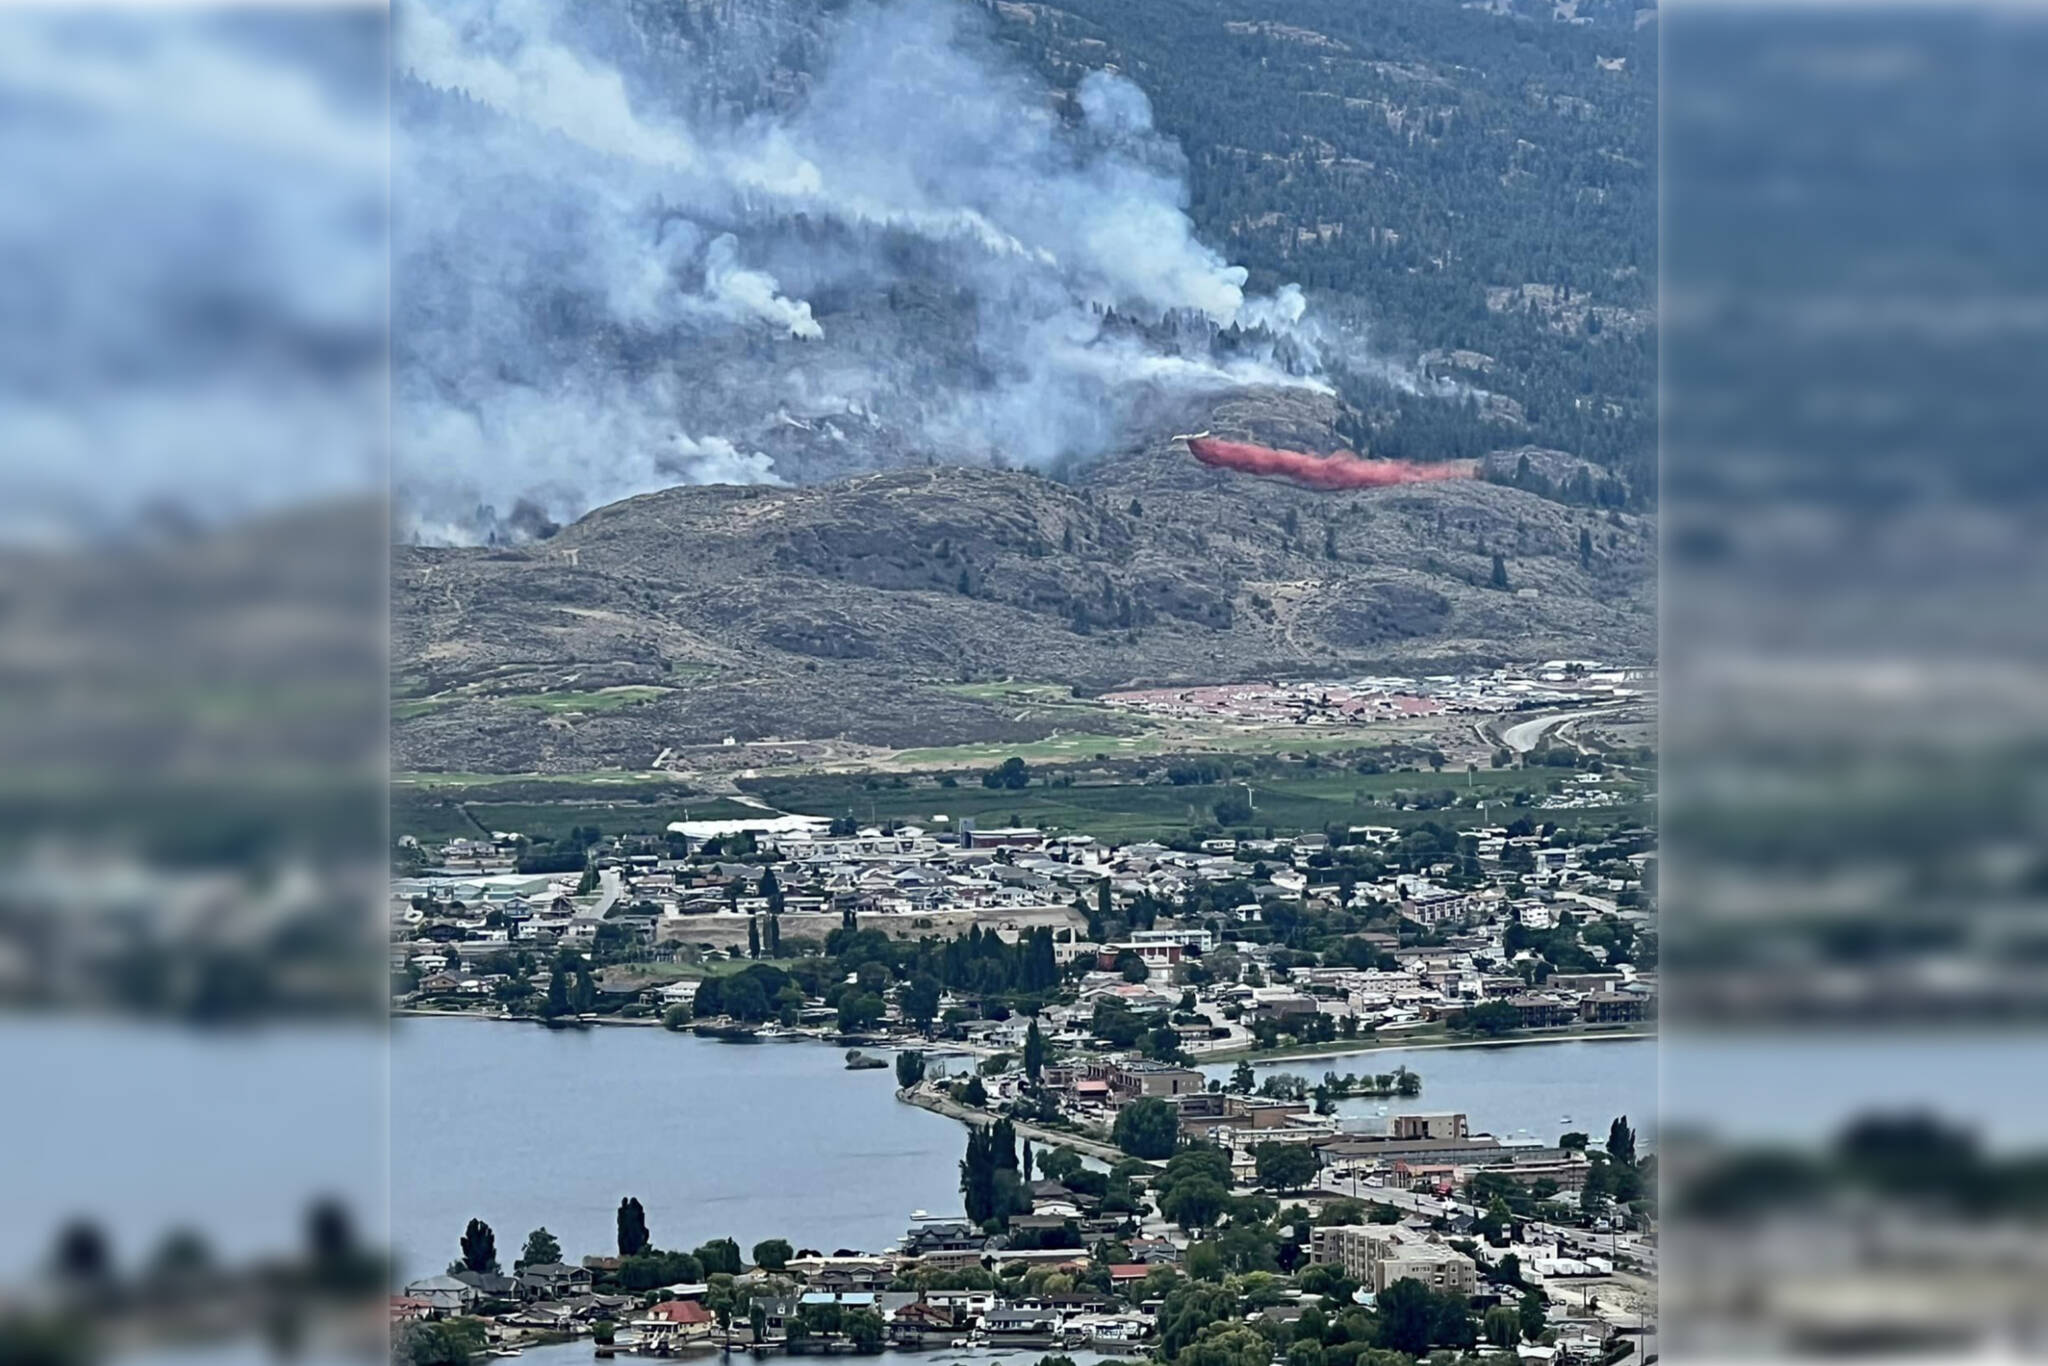 Air crews were busy dropping retardant on the flanks of the Eagle Bluff Wildfire on the edge of Osoyoos on July 30. The wildfire has now grown to more than 3,000 hectares, as of Tuesday, Aug. 1. (Melissa Genberg - Facebook)